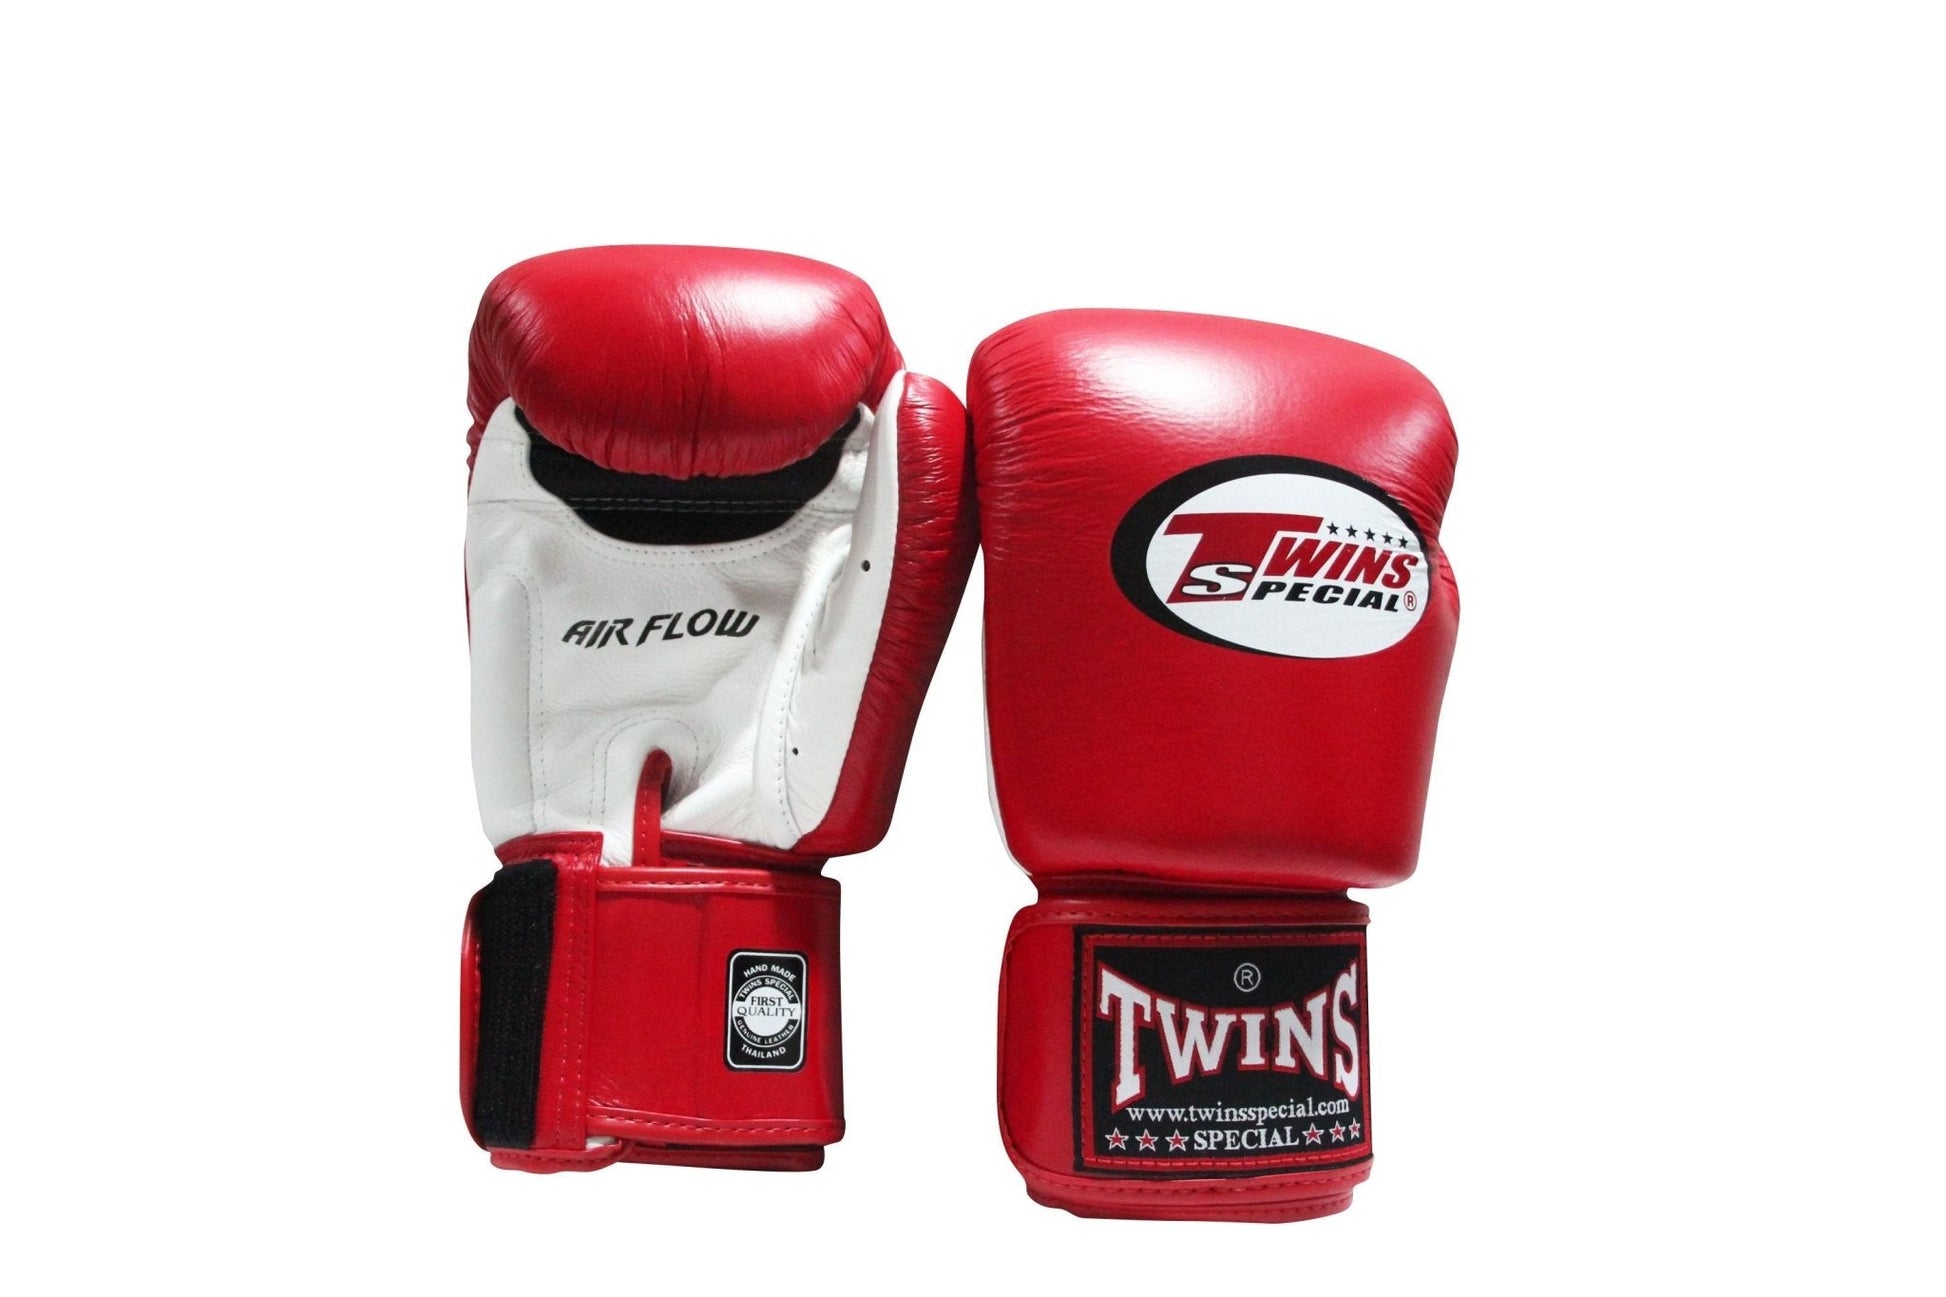 Twins Special BOXING GLOVES BGVLA2 AIR FLOW WH/RD/BK RED FRONT